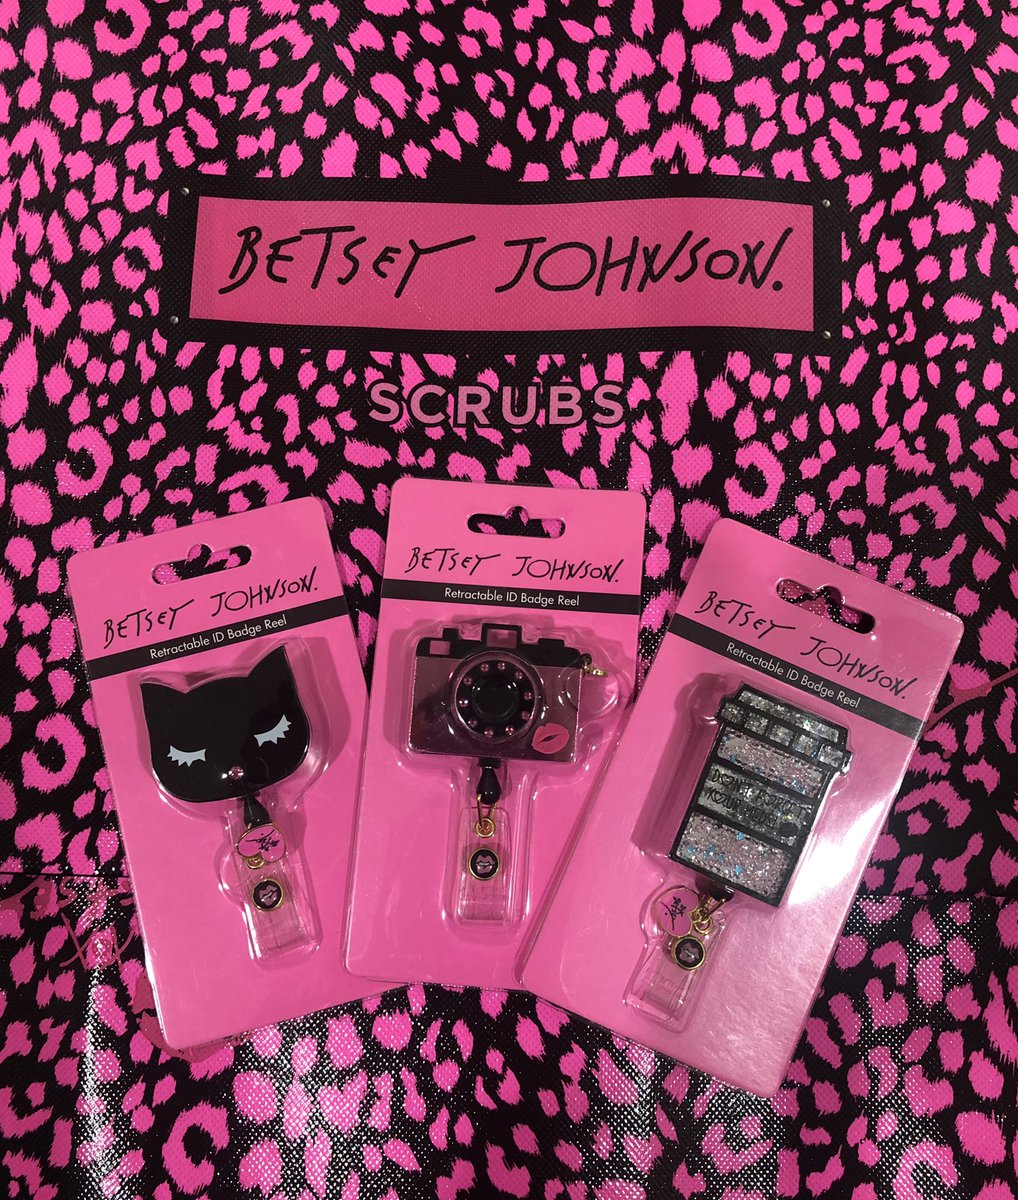 American Discount Uniform, Inc. on X: “Personality is a good thing”  -Betsey Johnson 😘  / X